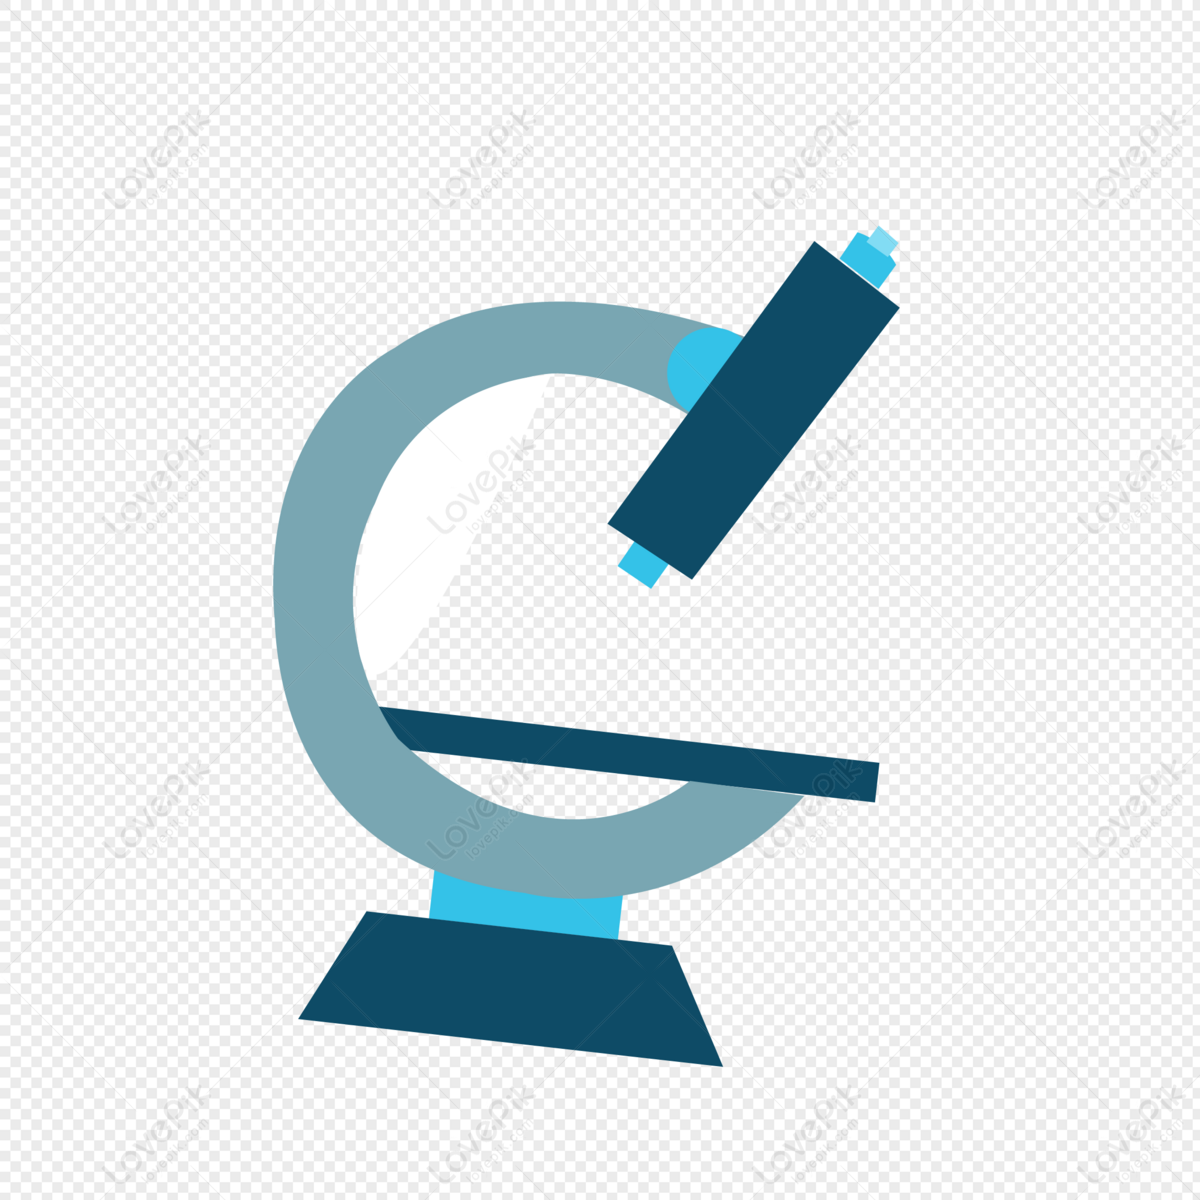 236 Microscope Logo High Res Illustrations - Getty Images